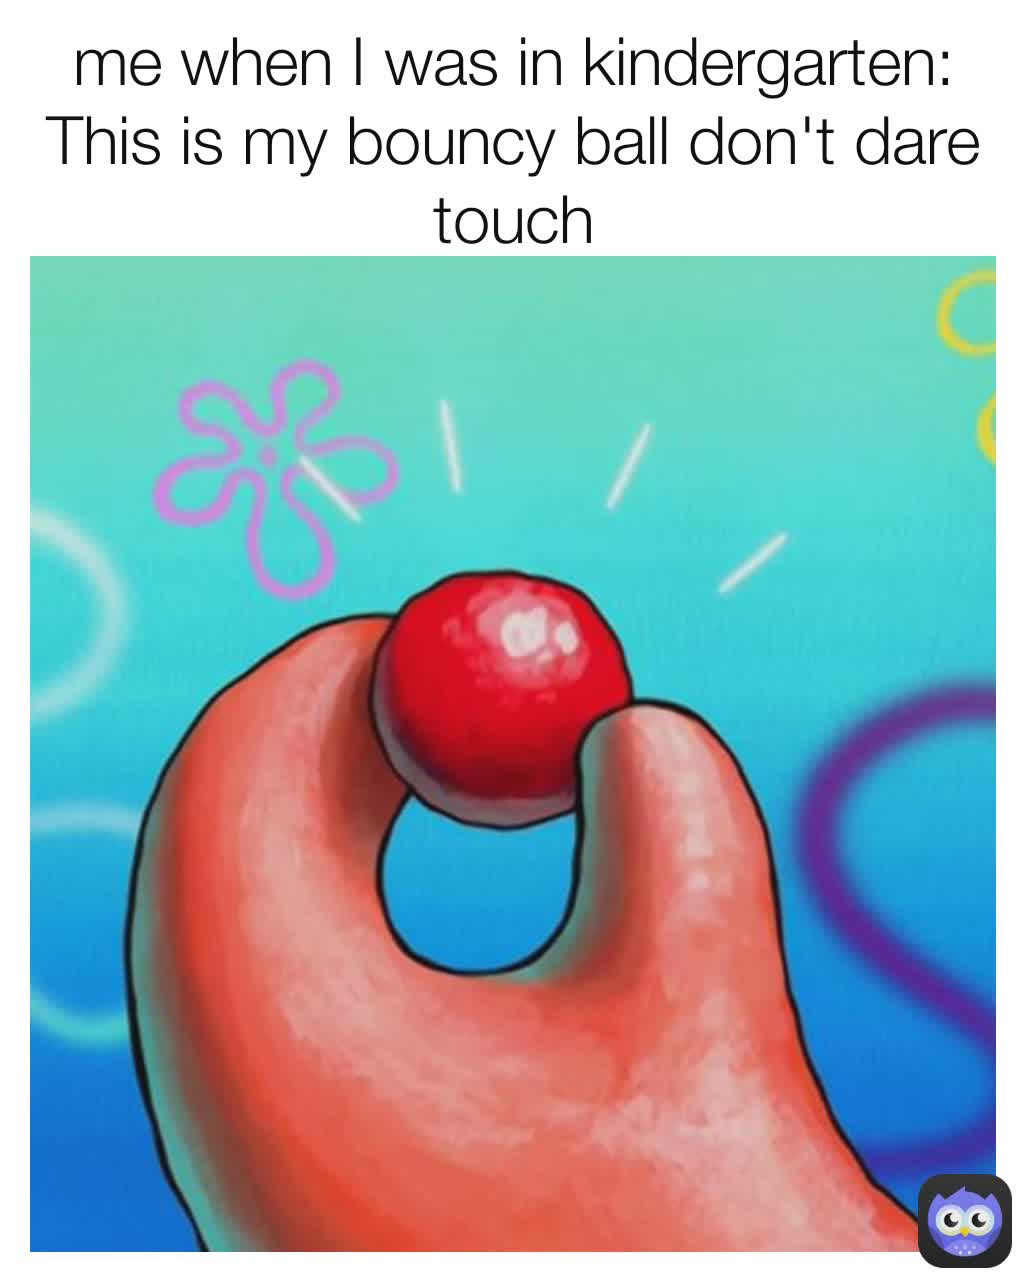 me when I was in kindergarten:
This is my bouncy ball don't dare touch